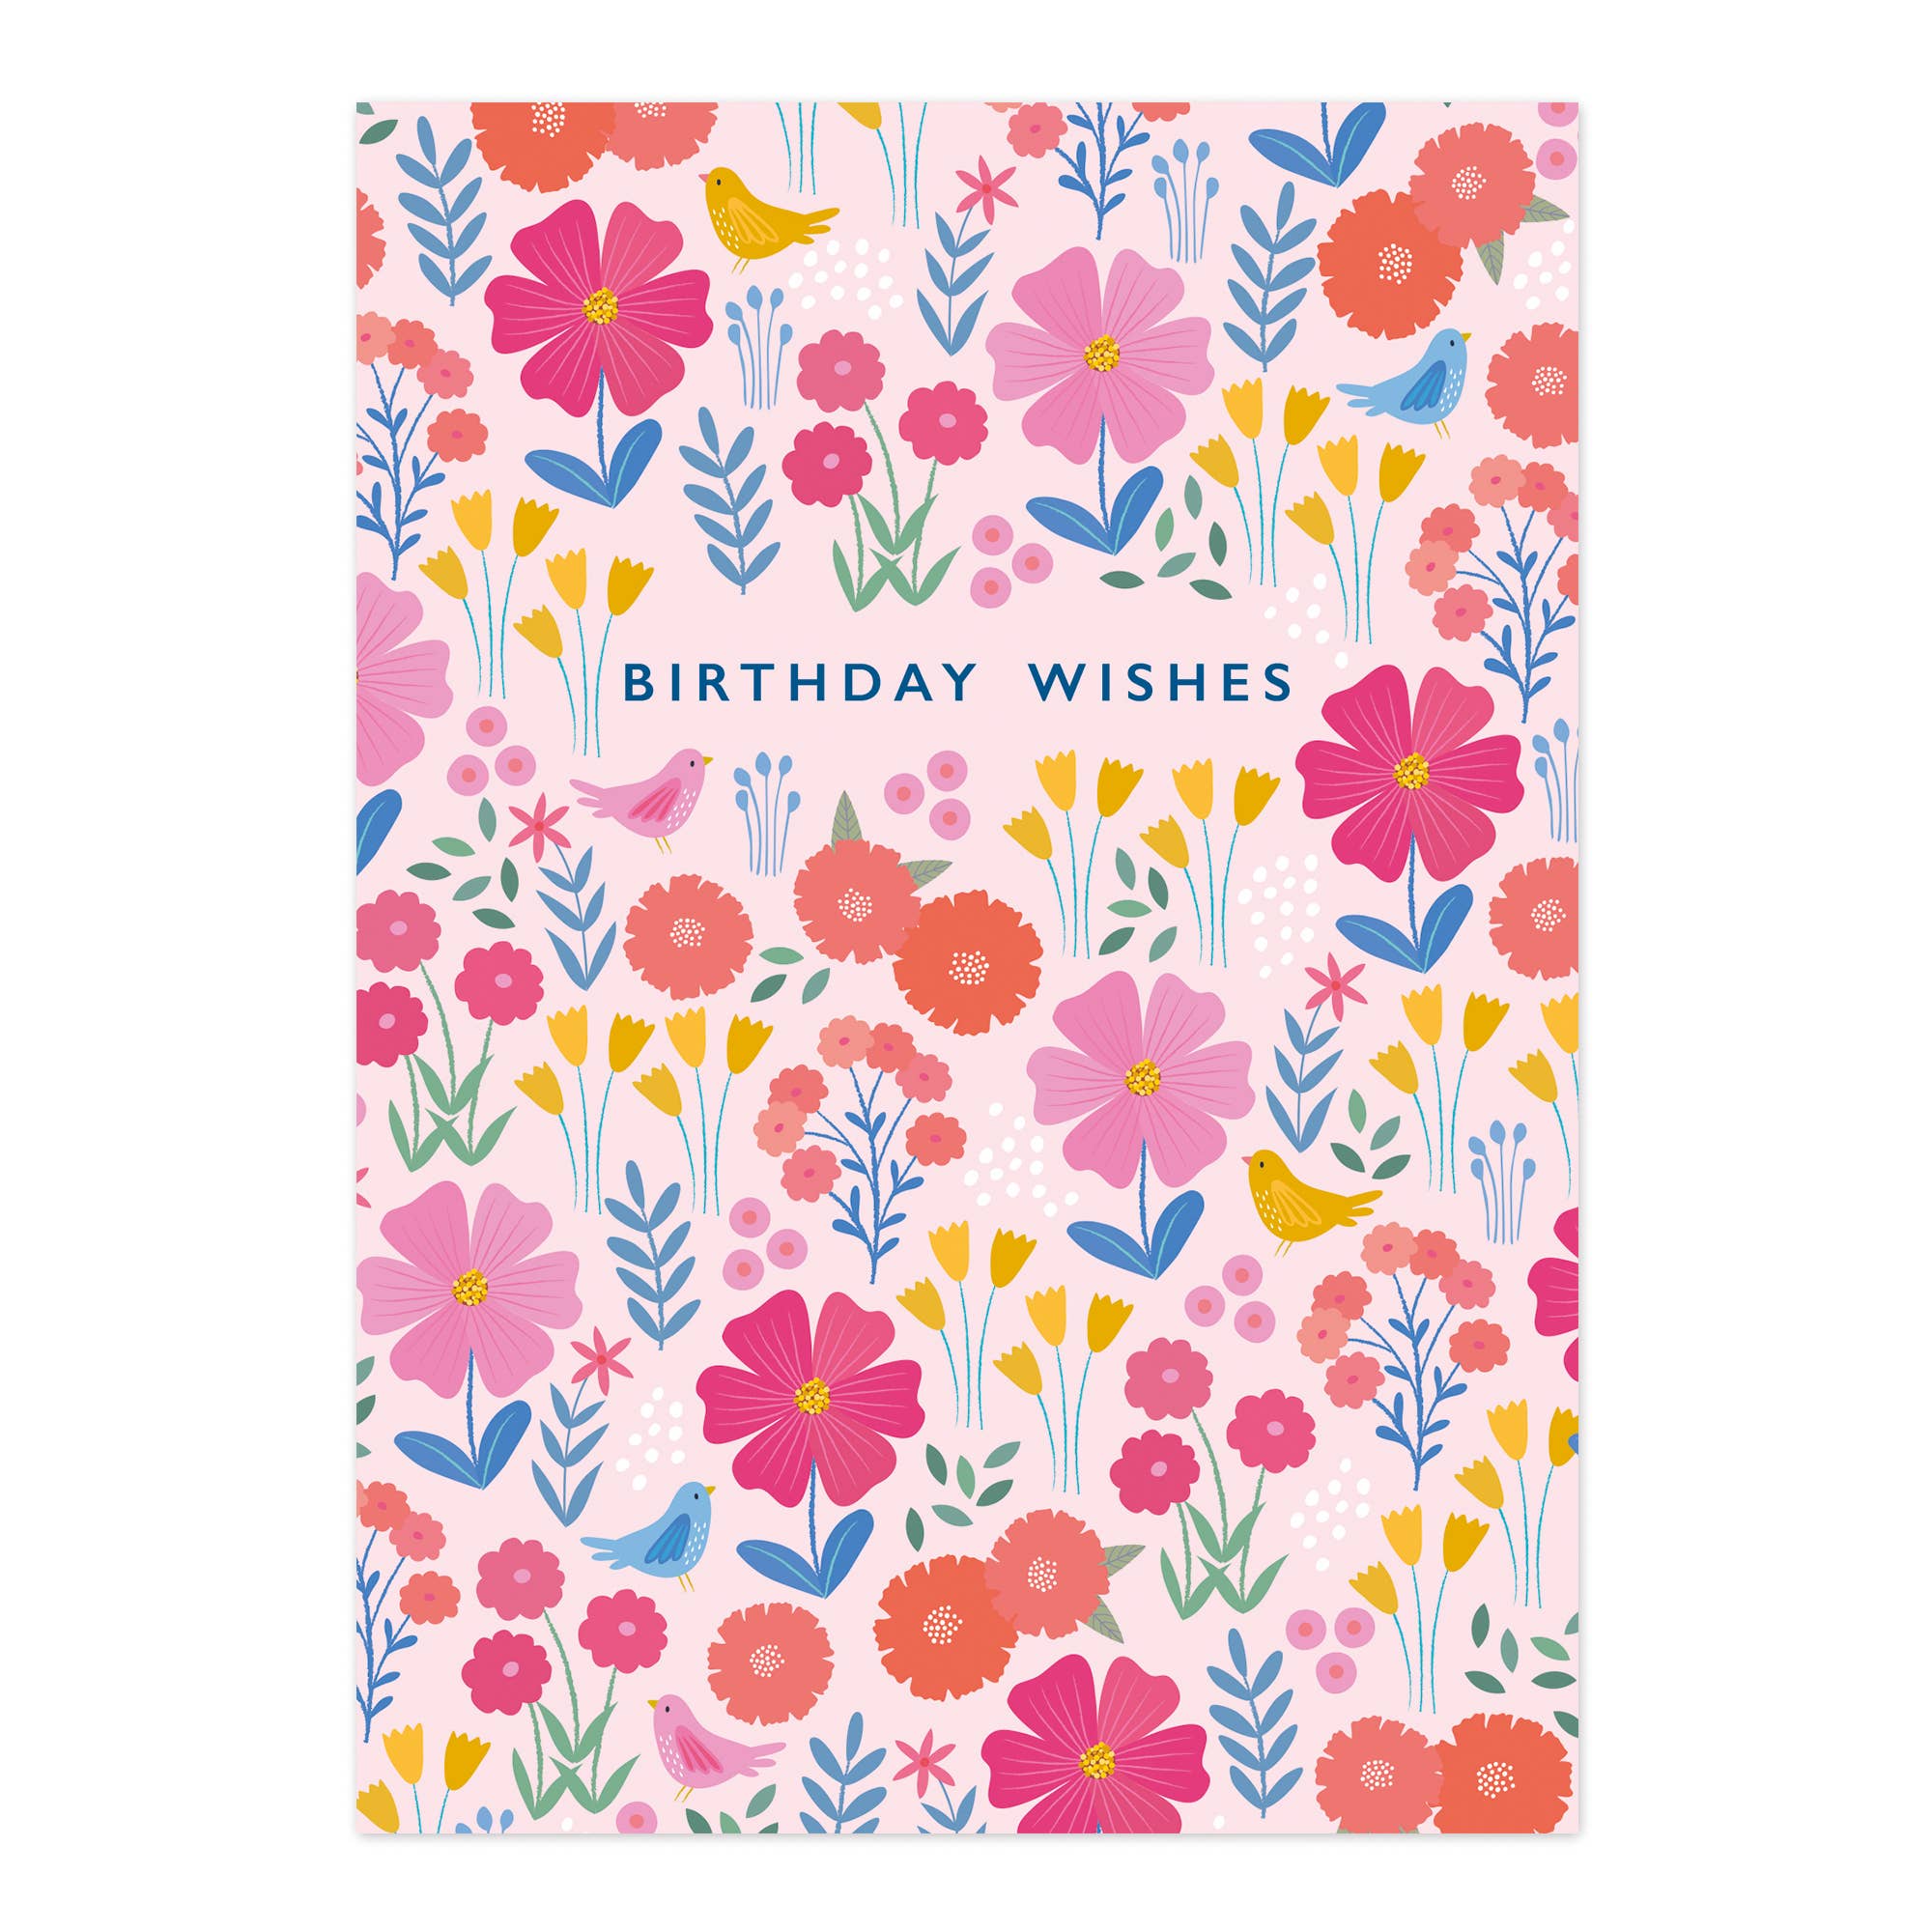 Birthday Wishes / Pretty Pink Floral Pattern Card